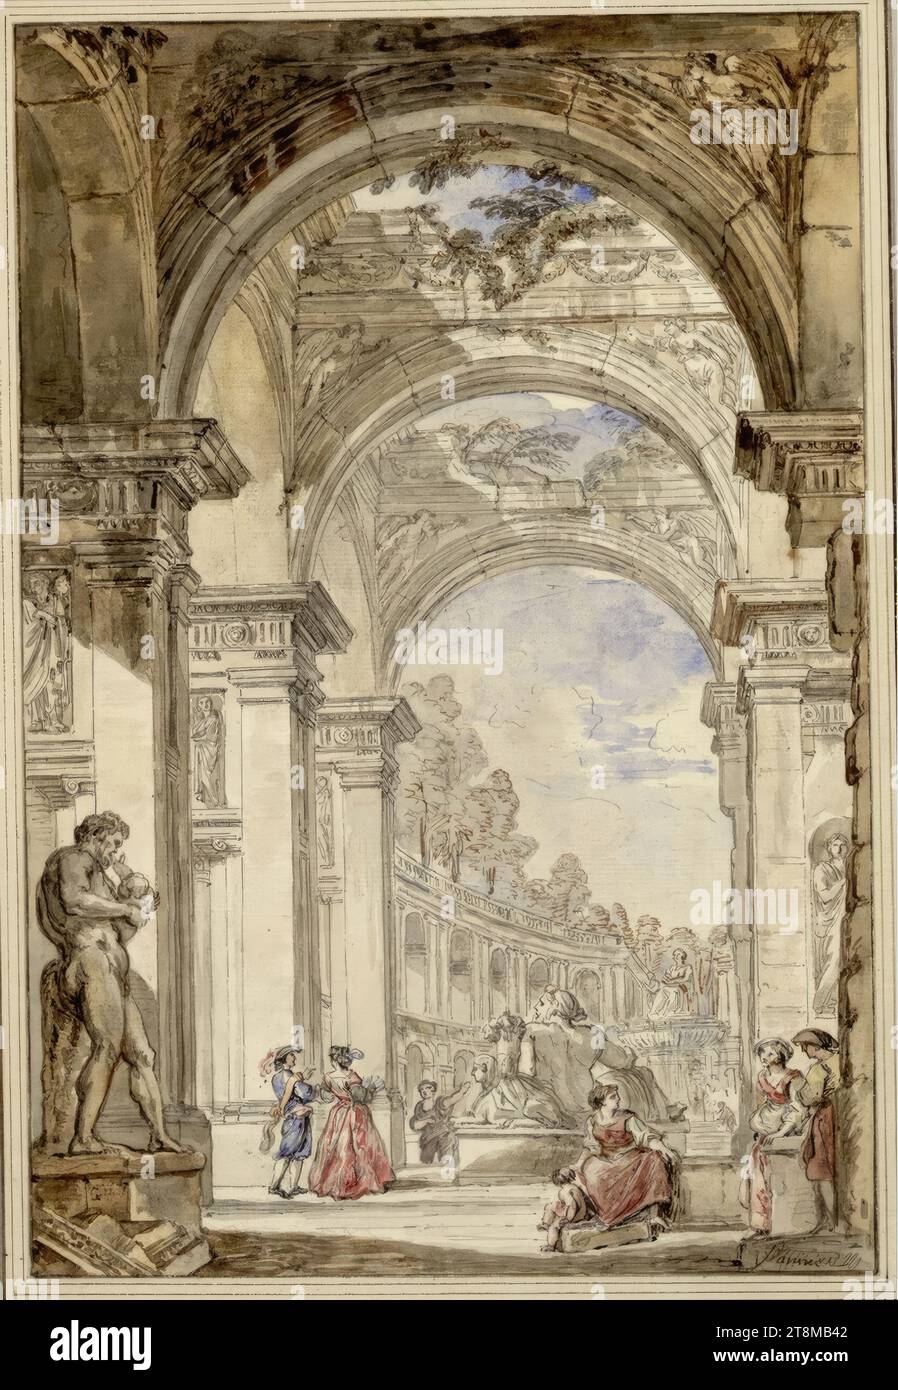 Antique hall with Doric columns and cracked ceiling, Giovanni Paolo Pannini (Piacenza 1691 - 1765 Rome), drawing, pen, watercolour, 35.5 x 23.8 cm, l.l. Duke Albert of Saxe-Teschen, left in the base of the Hercules 'G..' (two illegible letters); 'Panini' in pen lower right Stock Photo